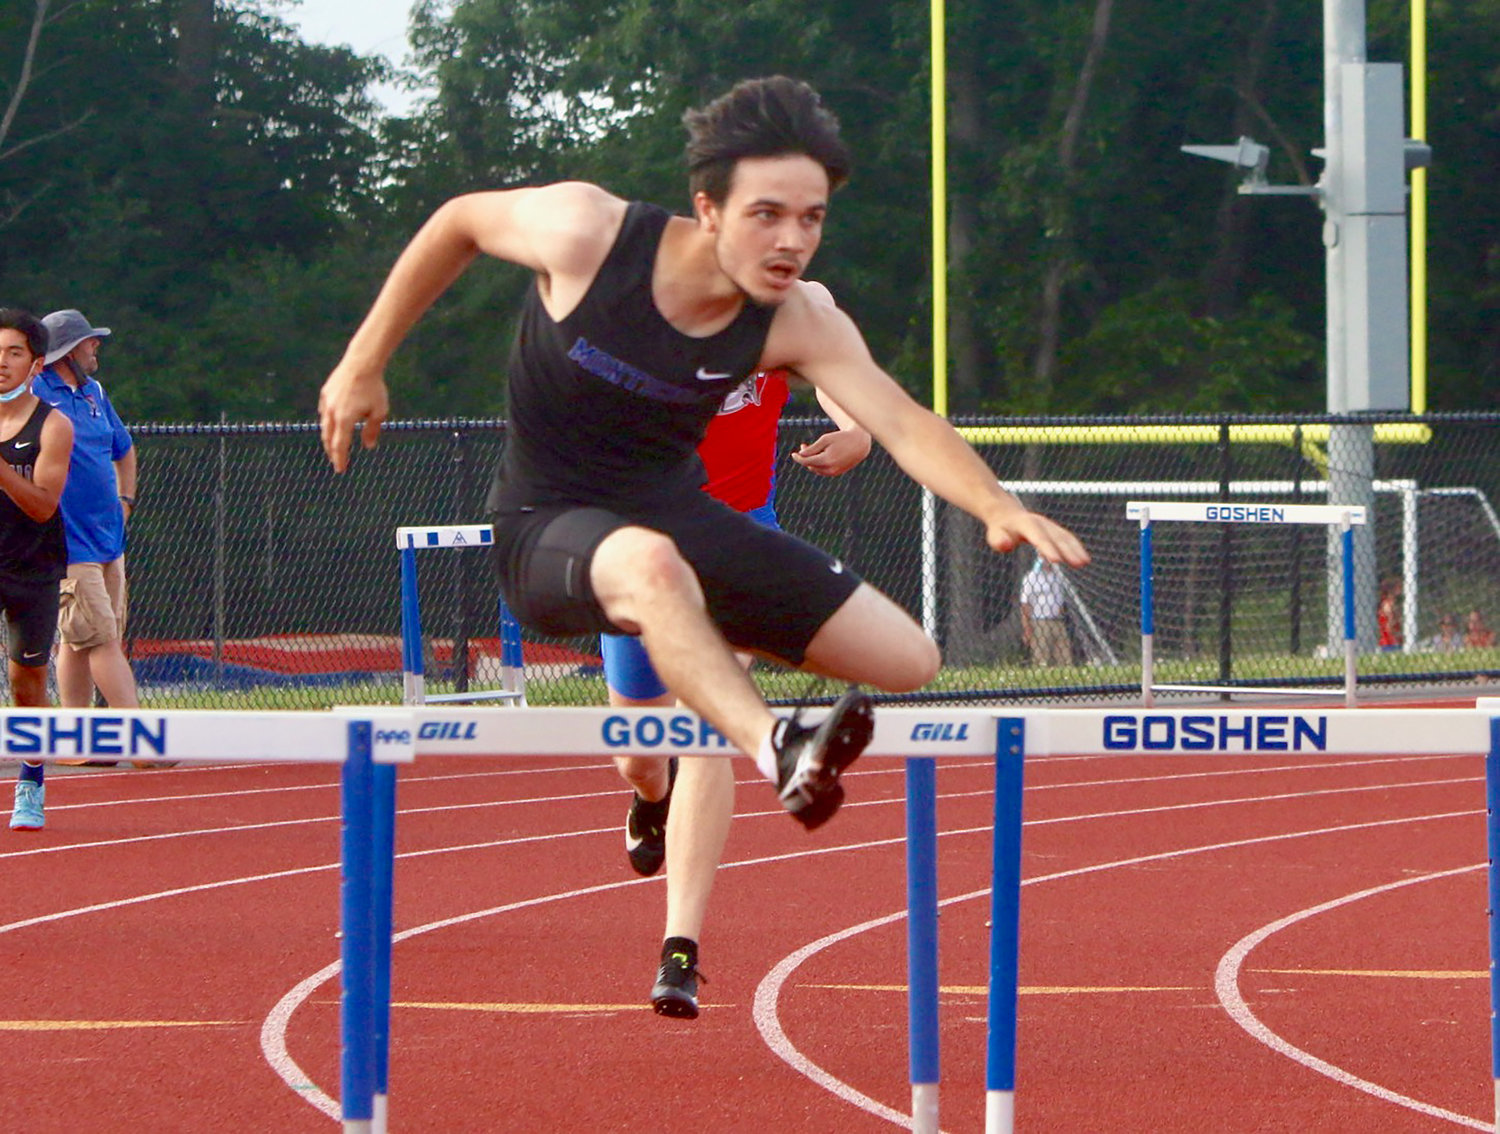 Monticello senior Elijah Rausch wins the 400 hurdles in a personal best time of 57.67. He captured second place in the 110 hurdles with a PR of 15.54.